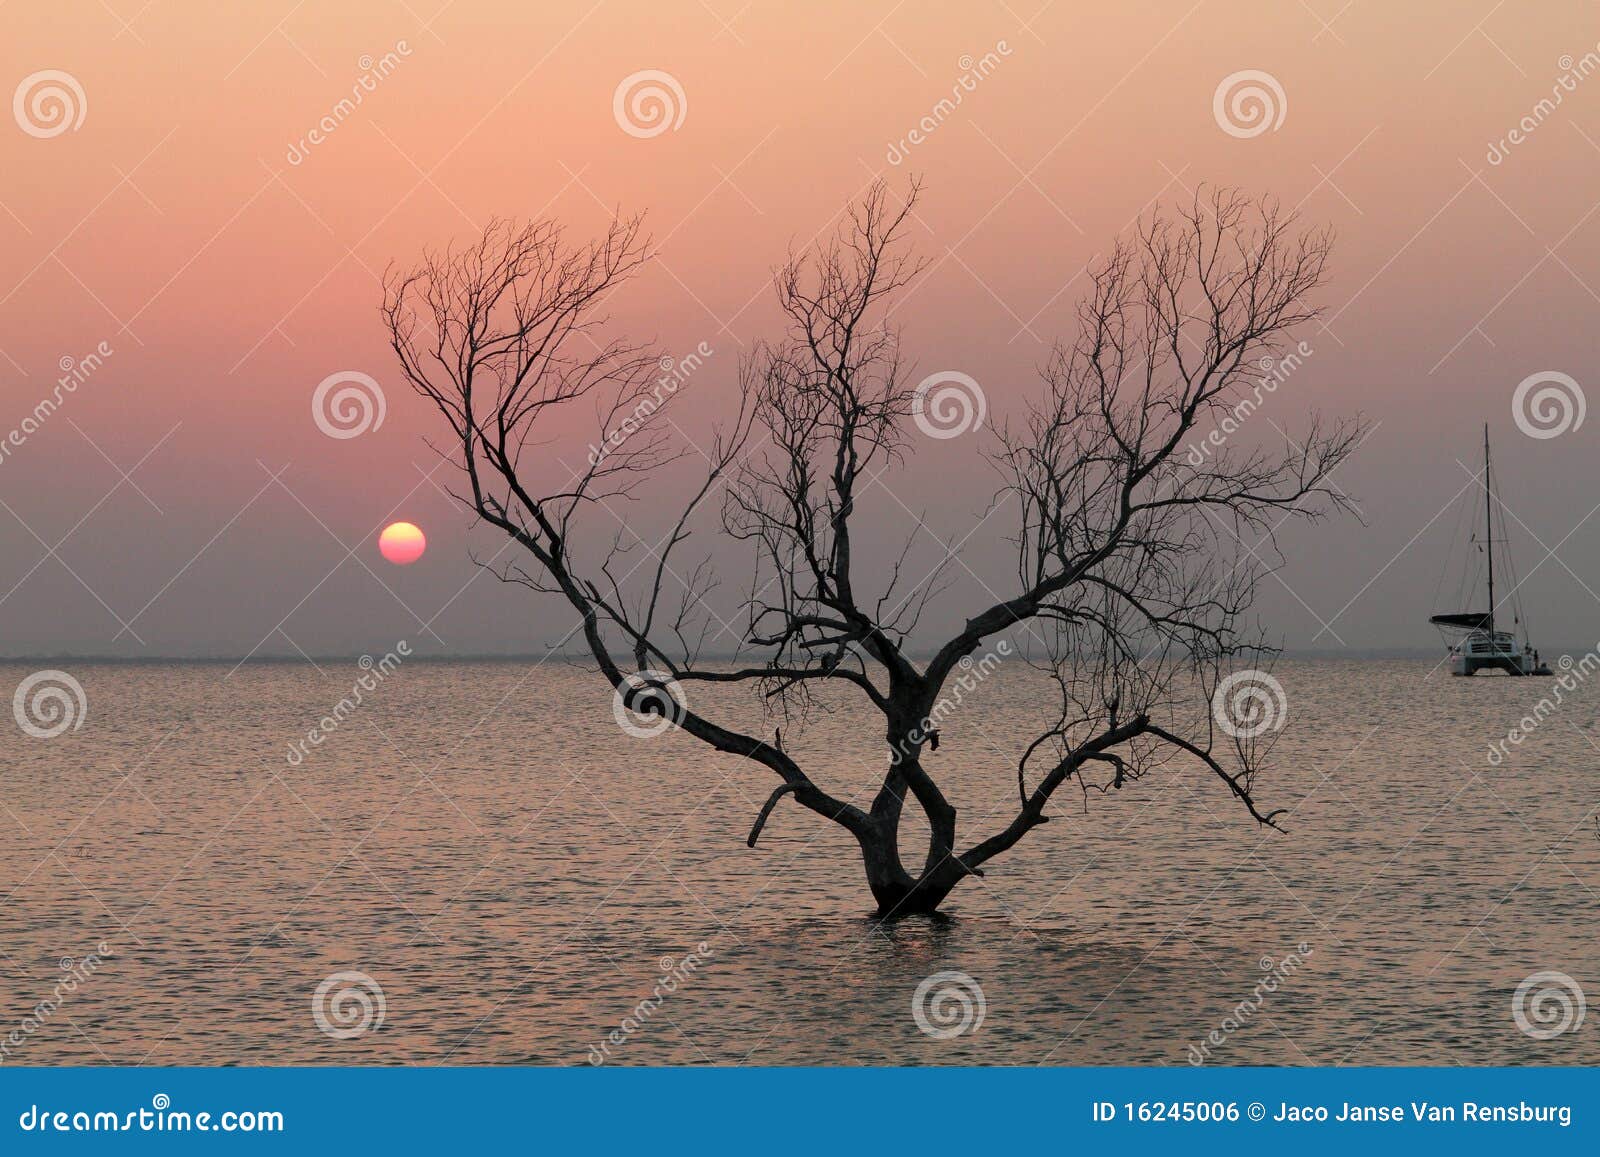 Tree at sunset on beach stock photo. Image of mozambique - 16245006